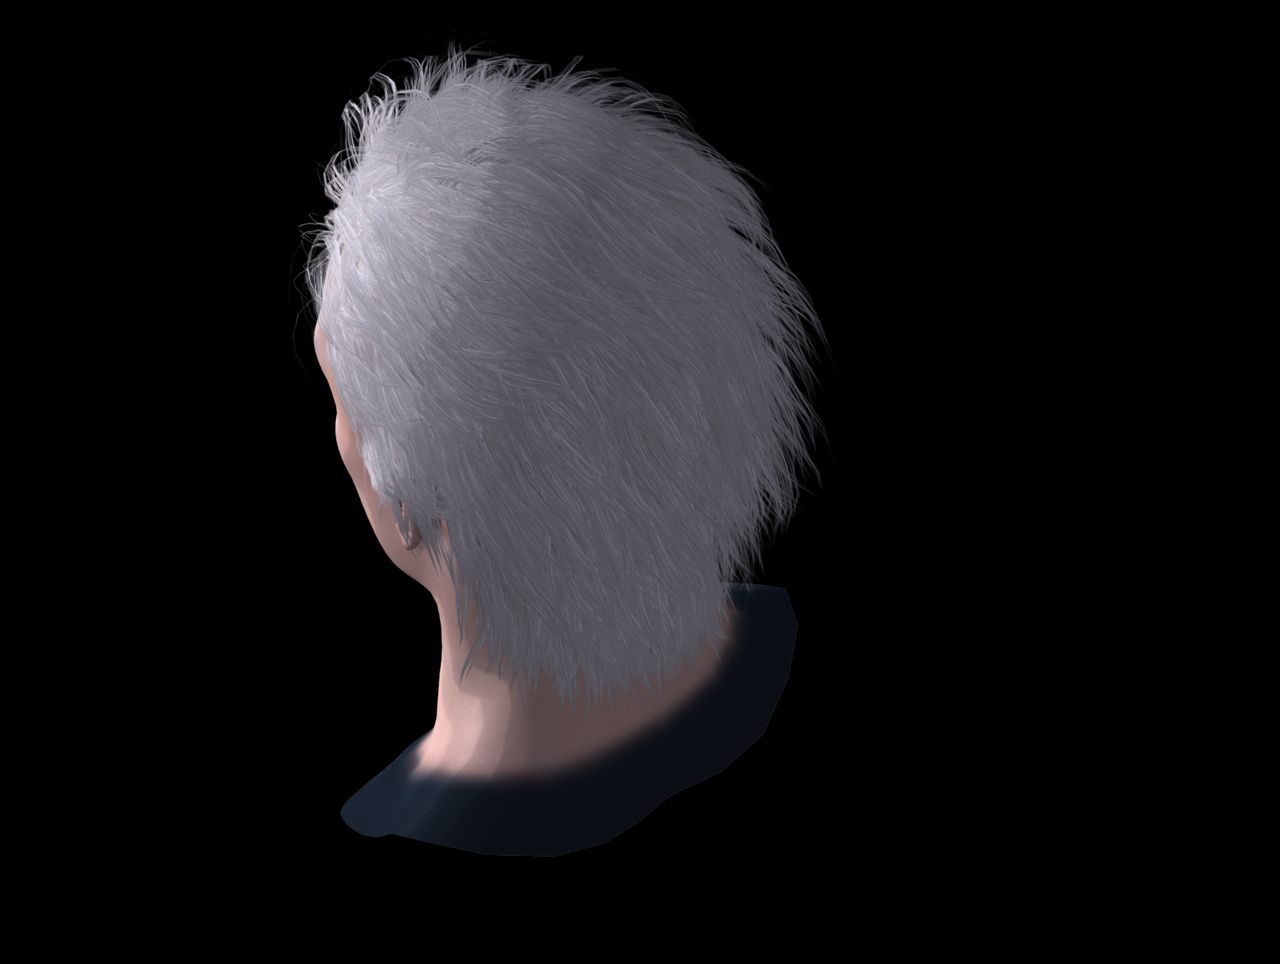 [J.A.] DMC5 | Vergil Head Reference PNG 41